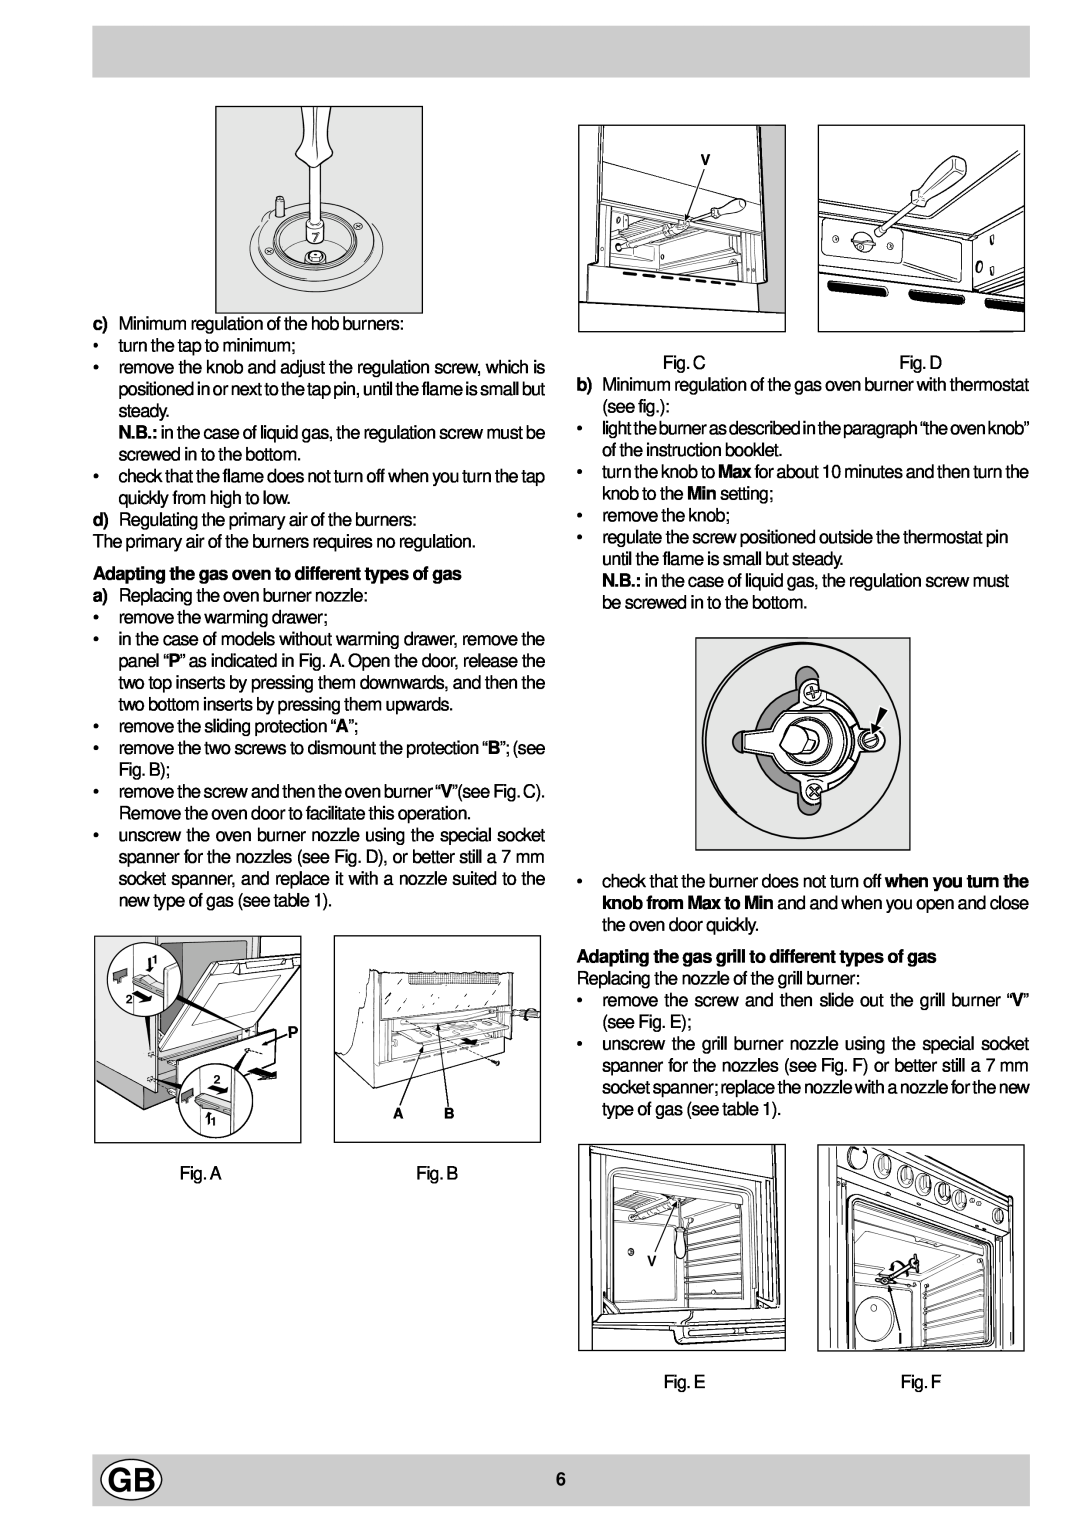 Indesit K 642 G/G, K 647R G/G, K 645R G/G, K 6432 G/G manual Adapting the gas oven to different types of gas, Fig. D, Fig. B 